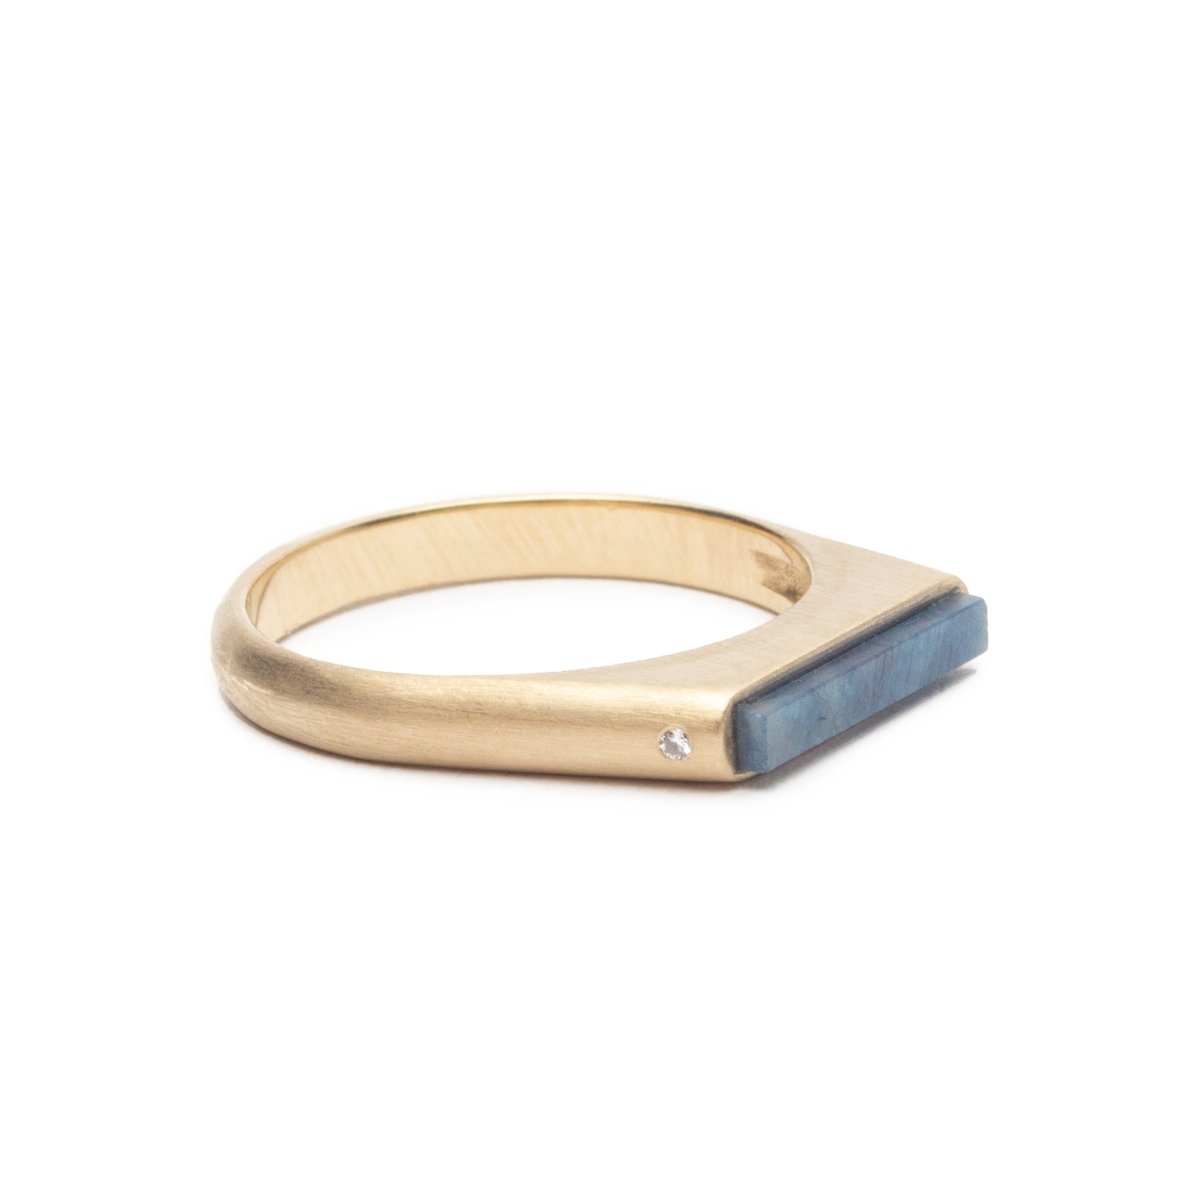 Sapphire Lucet ring with two white lab-grown diamonds, set in 14k recycled yellow gold. Designed and handcrafted in Portland, Oregon. 